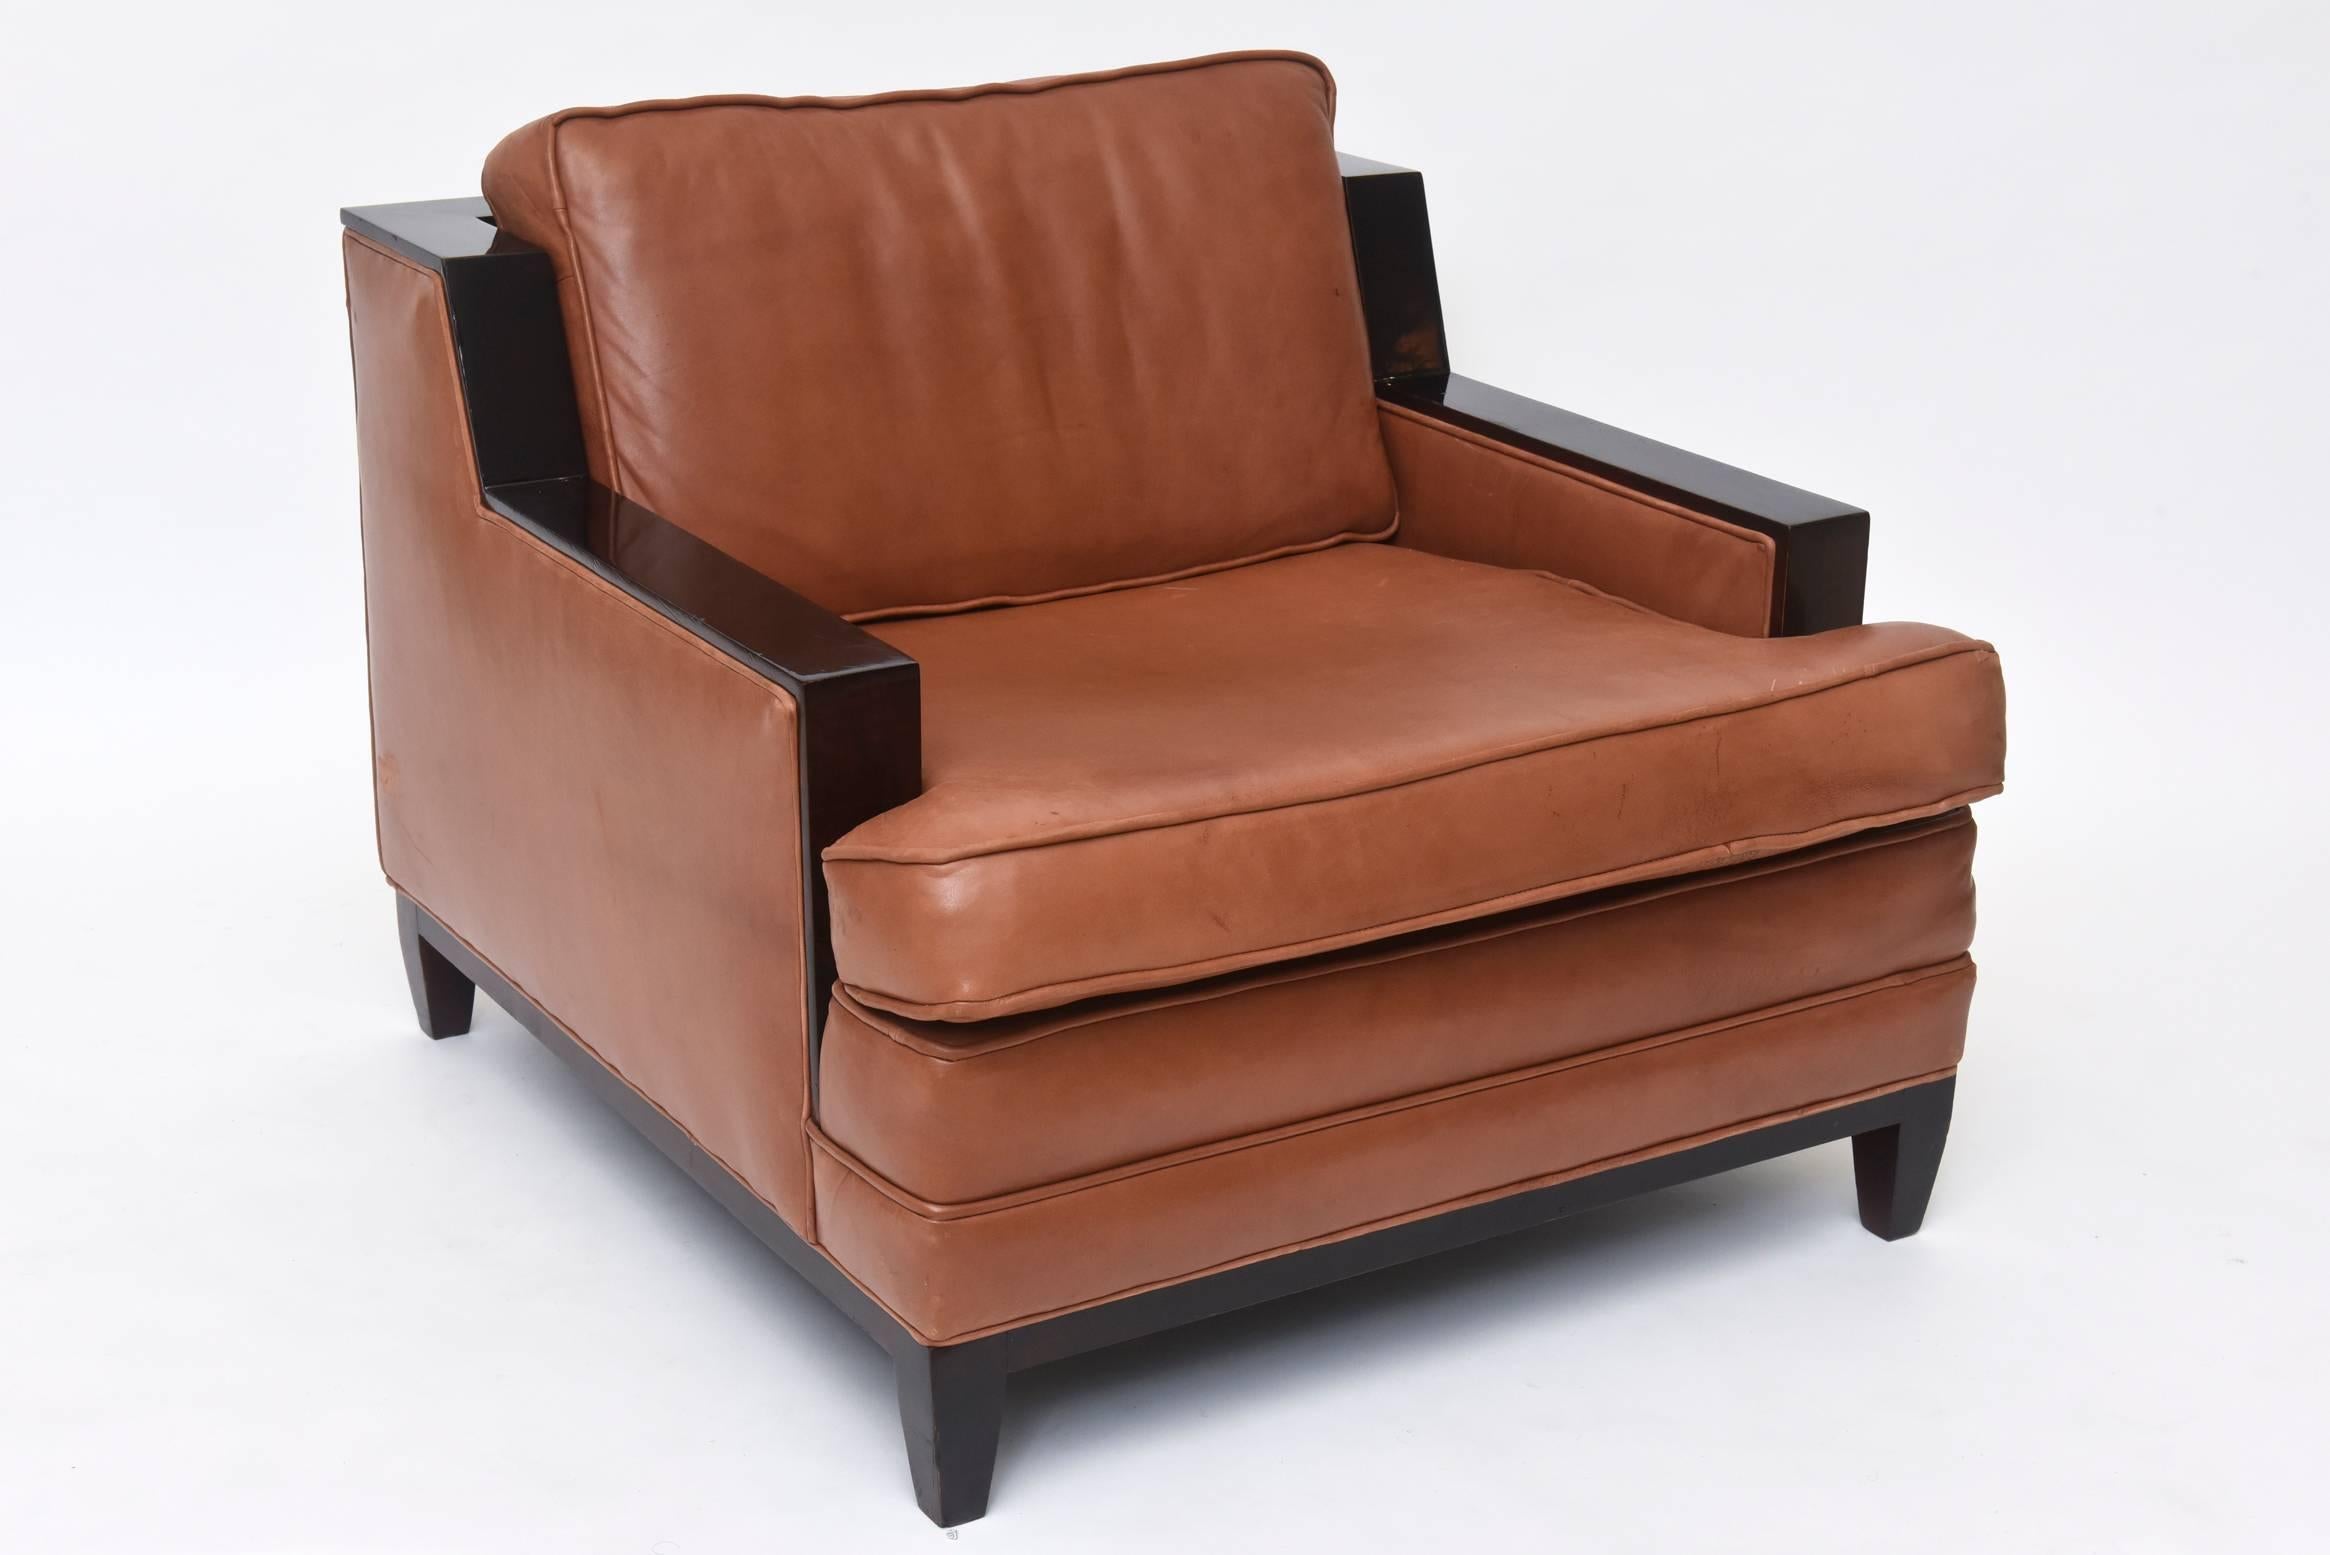 Pair of mahogany chestnut-colored leather lounge chair attributed to Jacques Adnet known for his elegant and luxurious Art Deco designs, 1940s.

  